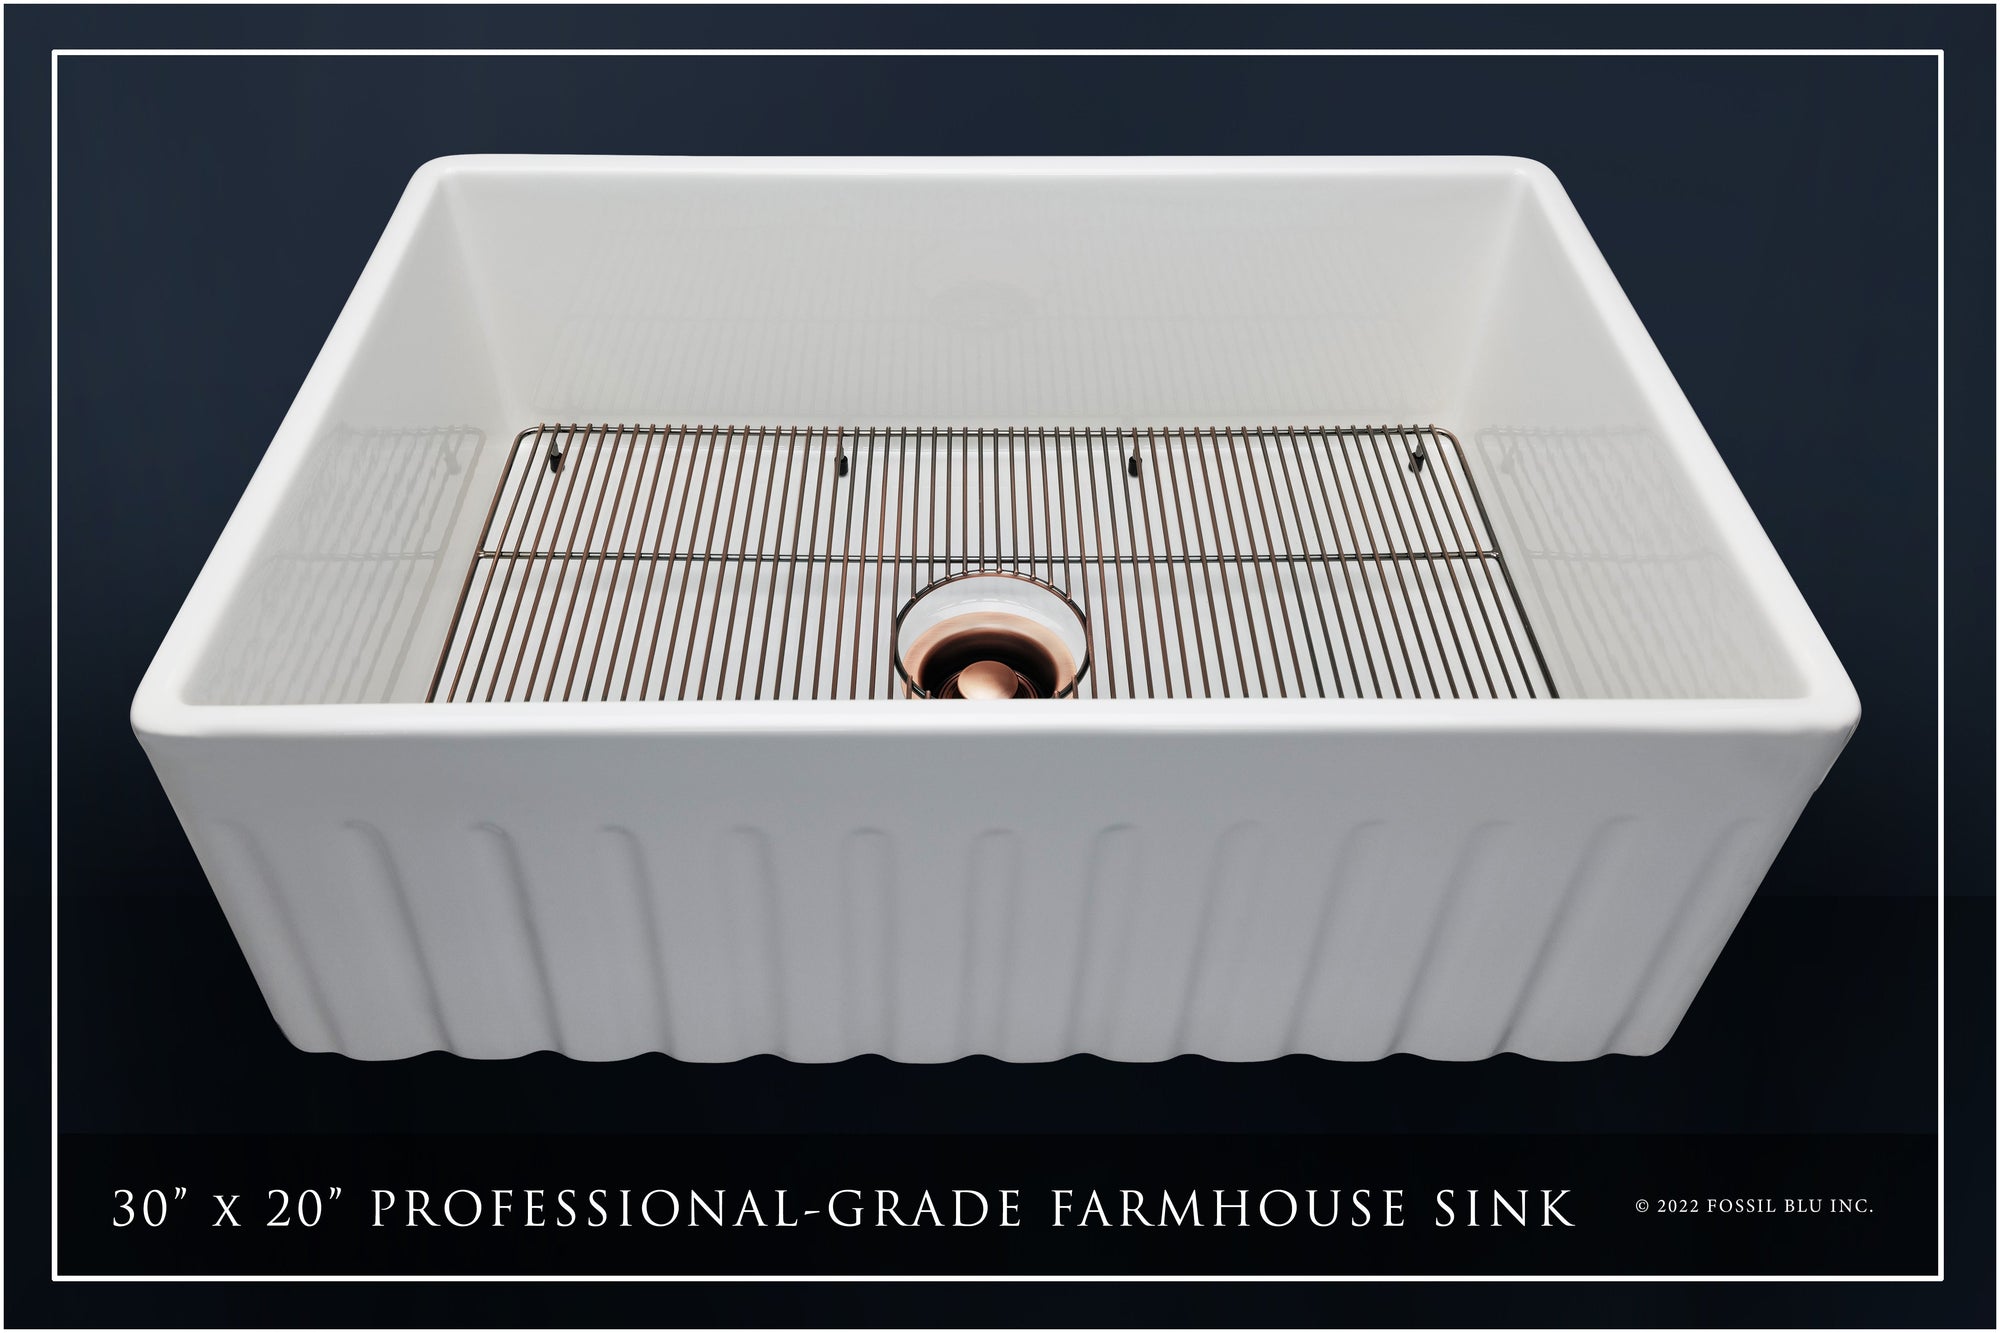 FSW1005AC LUXURY 30-INCH SOLID FIRECLAY FARMHOUSE SINK IN WHITE, ANTIQUE COPPER ACCS, FLUTED FRONT